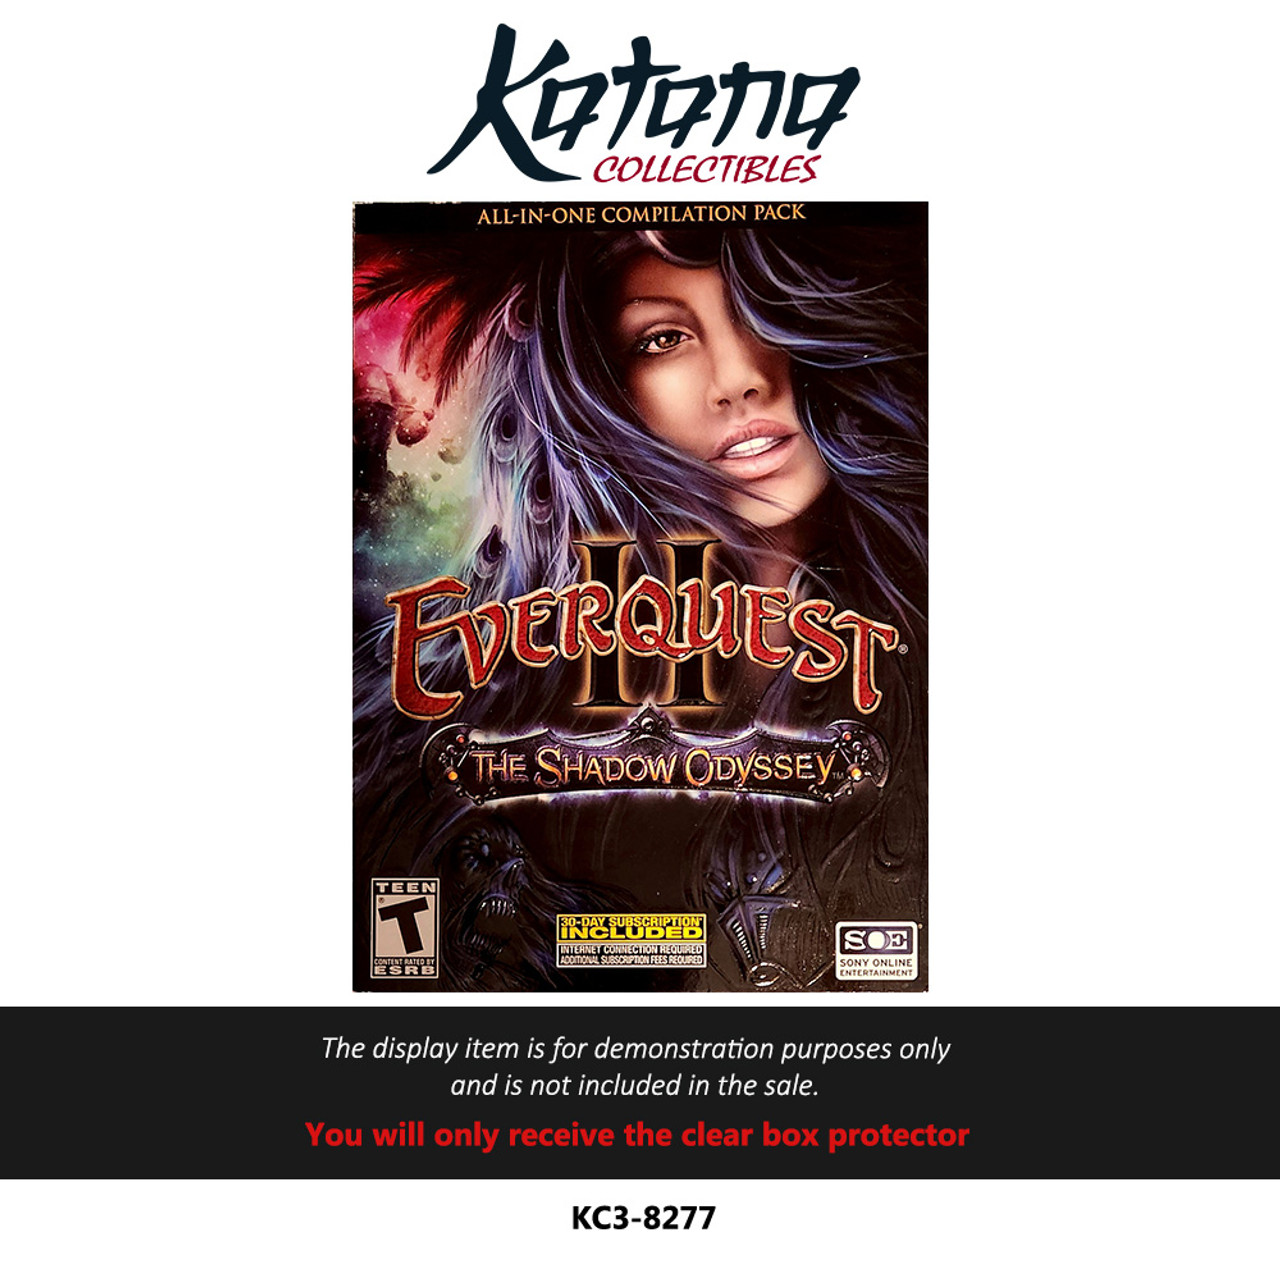 Katana Collectibles Protector For EverQuest II: The Shadow Odyssey Expansion Pack (PC Box)